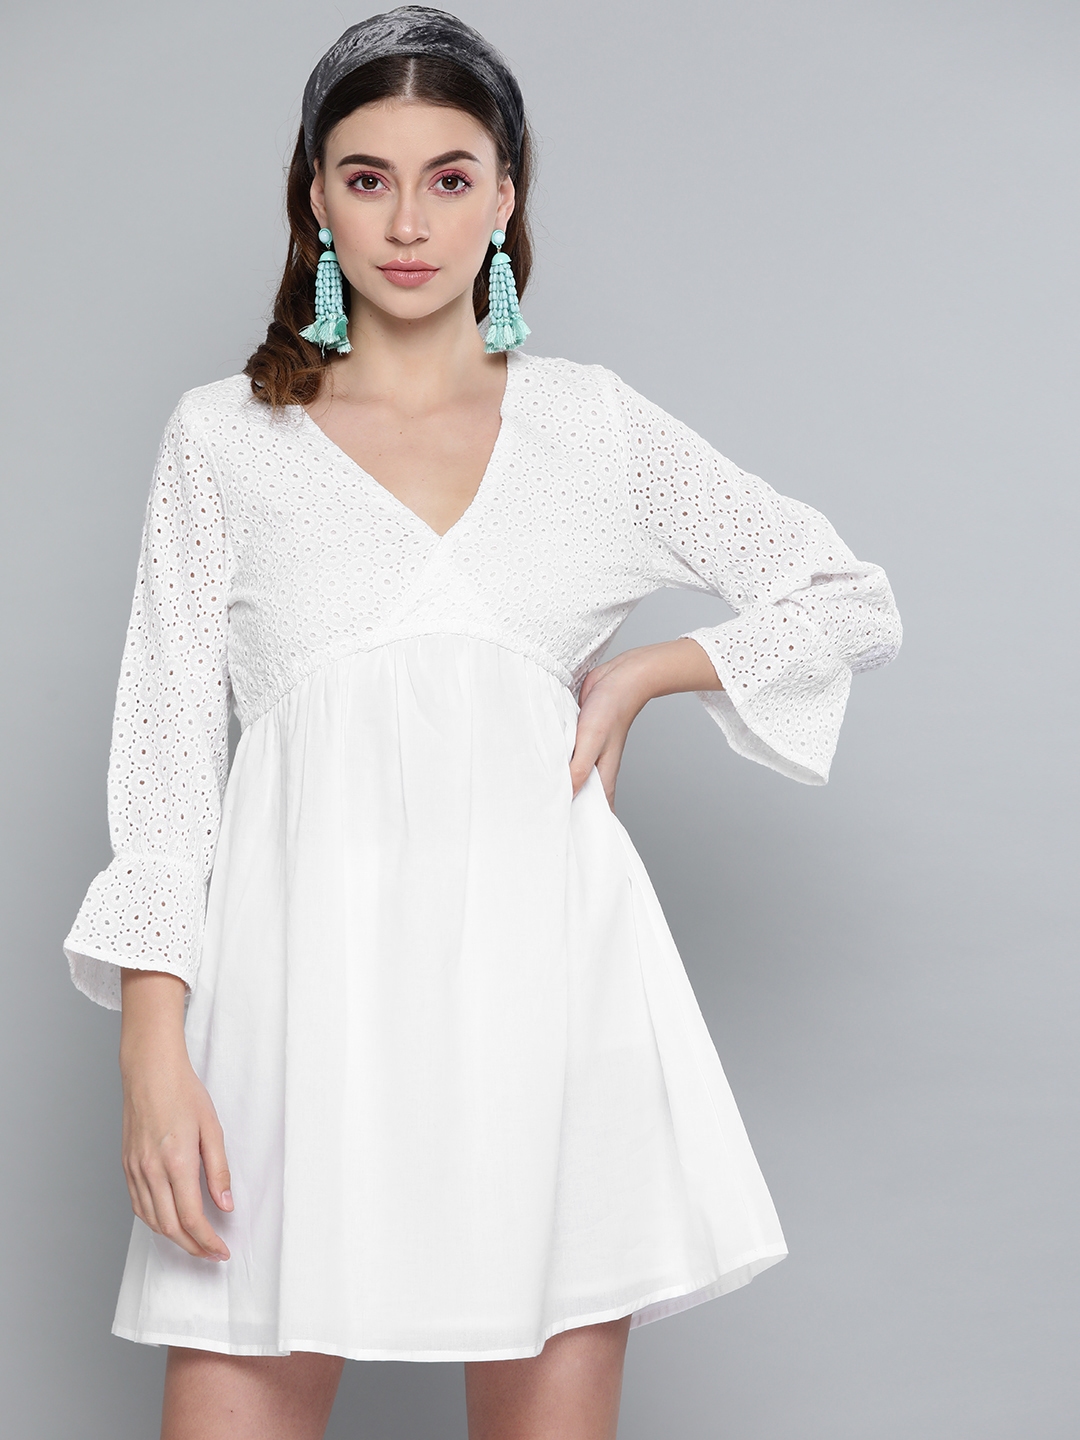 White Gown - Get White Gown Online for Women & Girls from Myntra